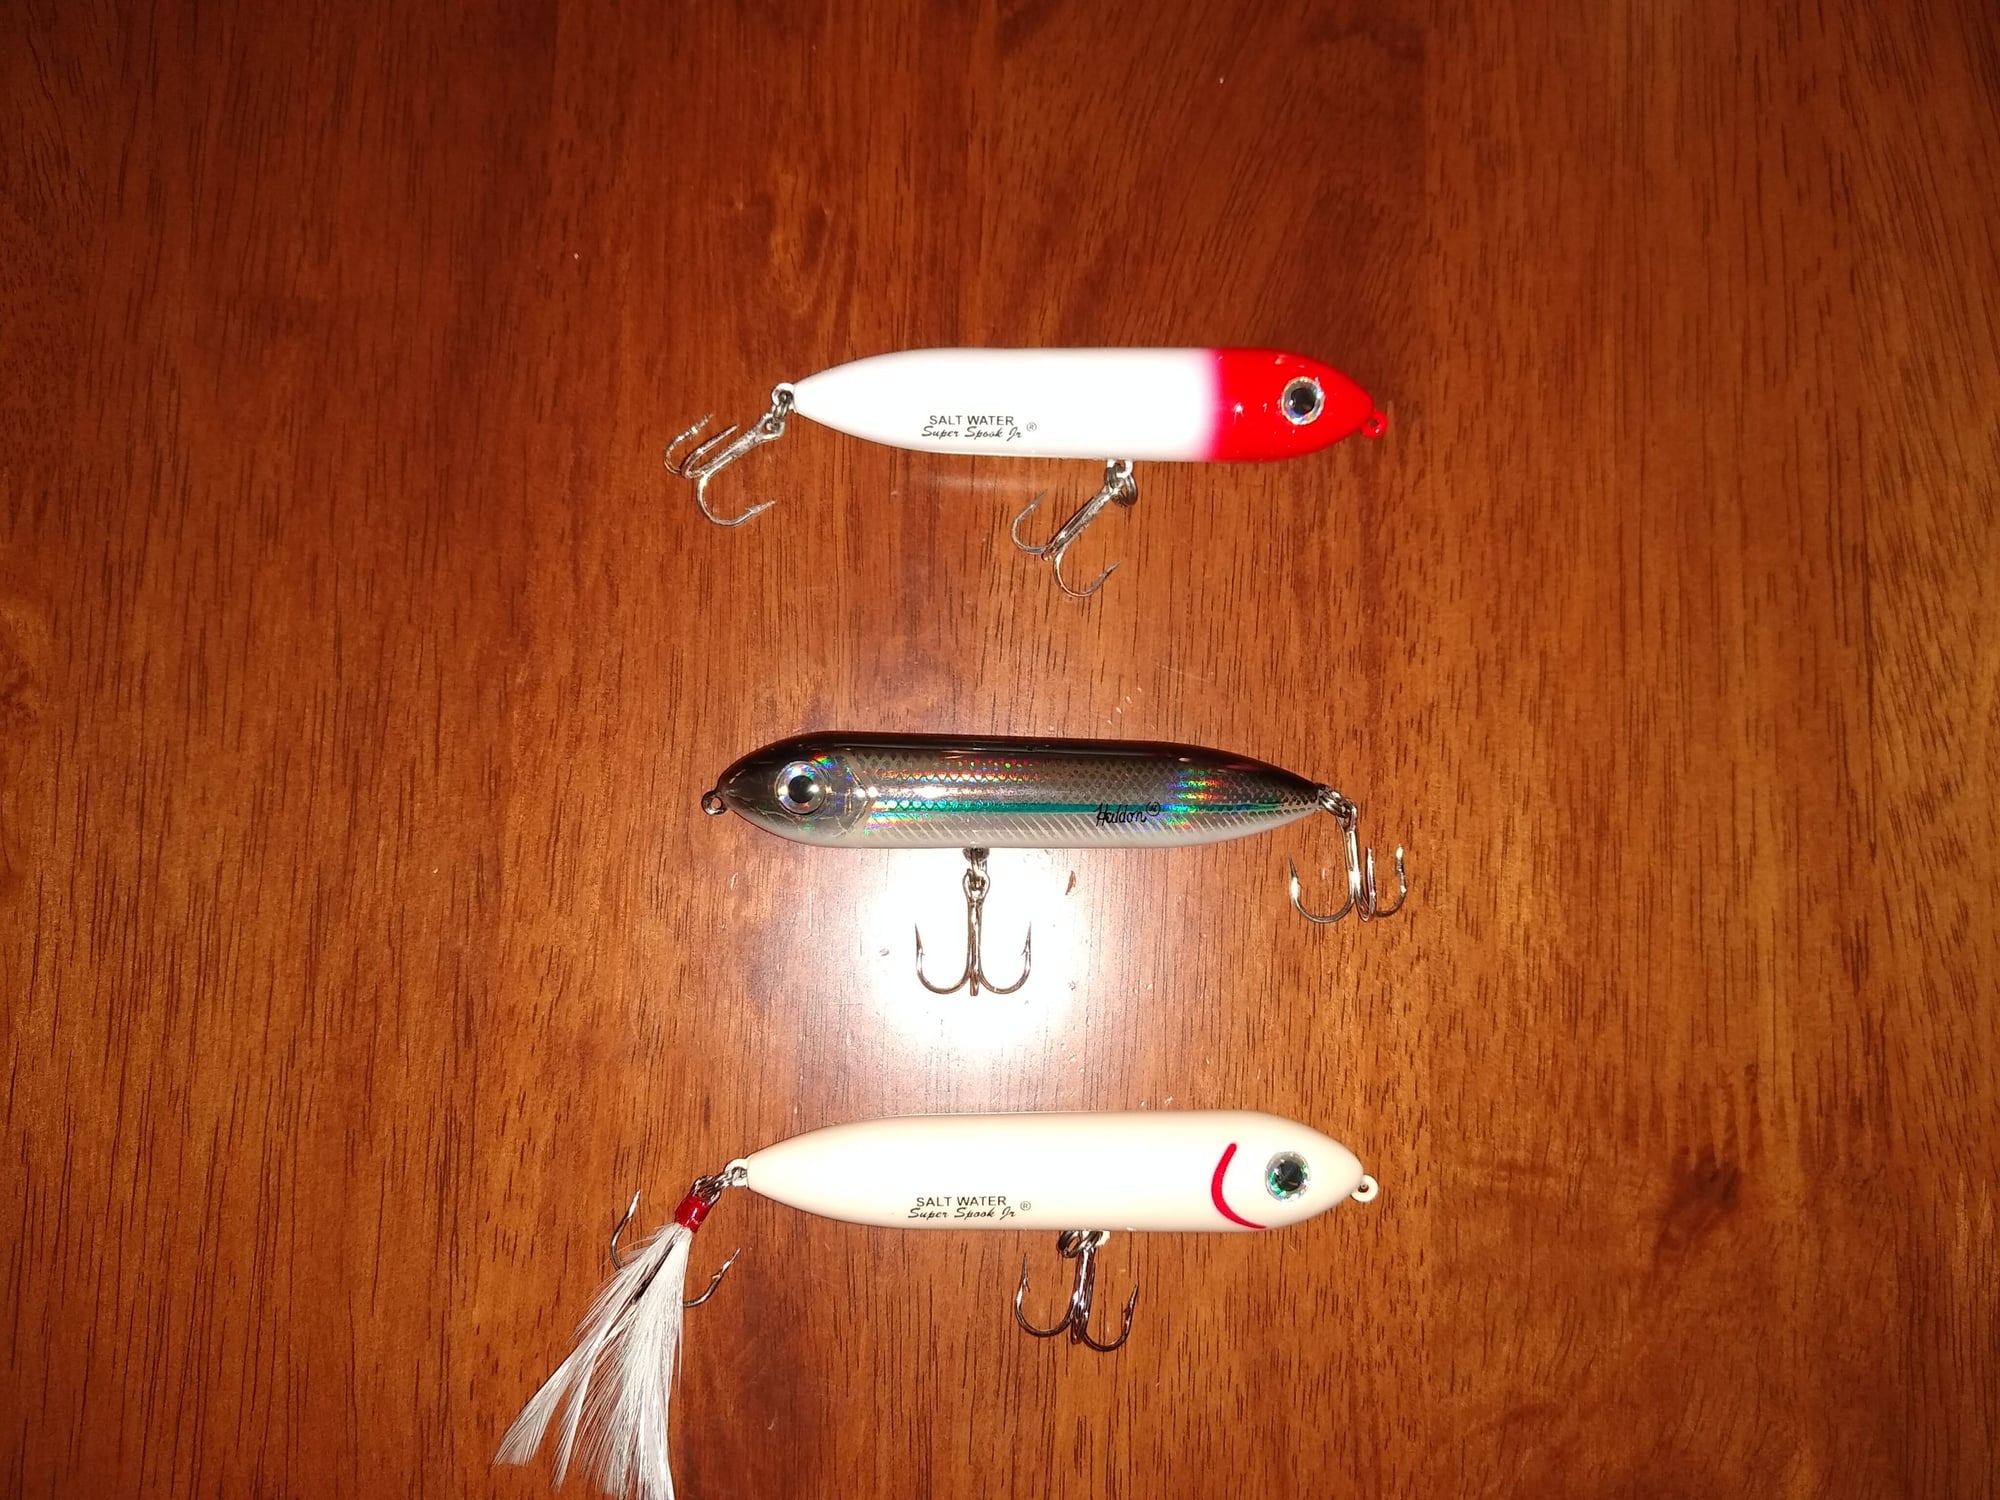 Top water baits - The Hull Truth - Boating and Fishing Forum